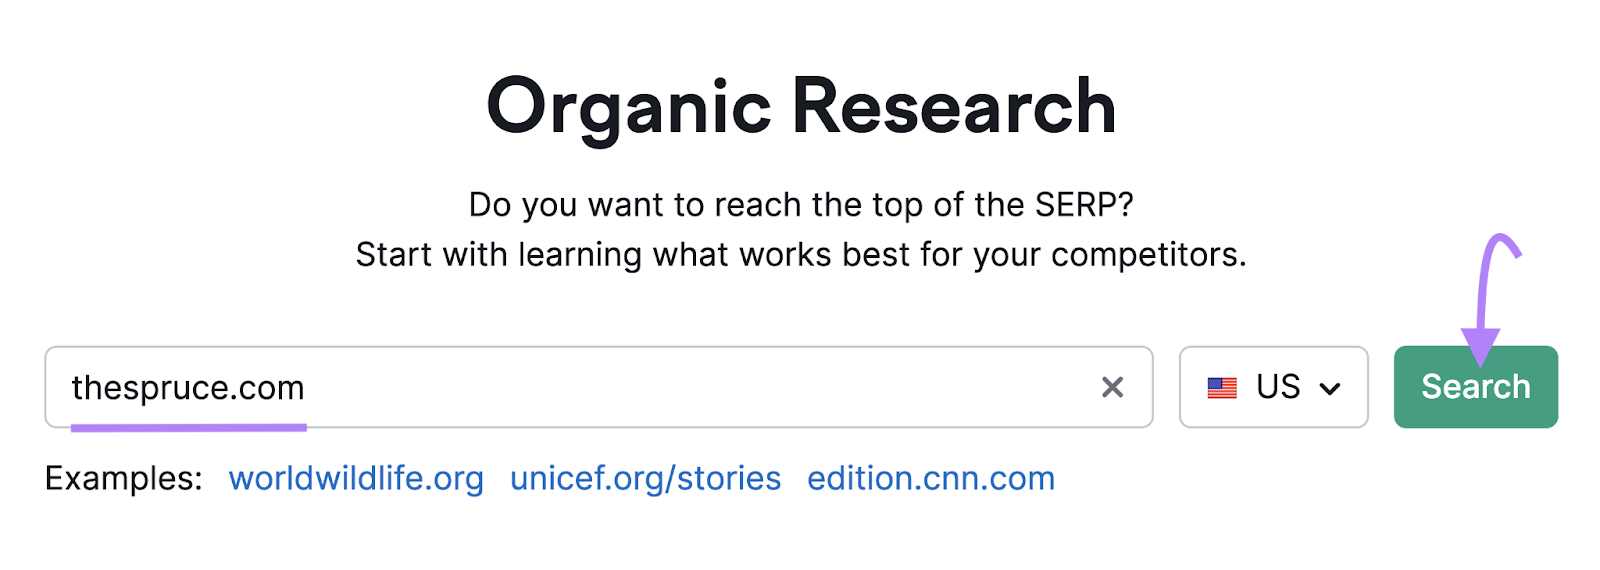 "thespruce.com" entered into Organic Research search bar